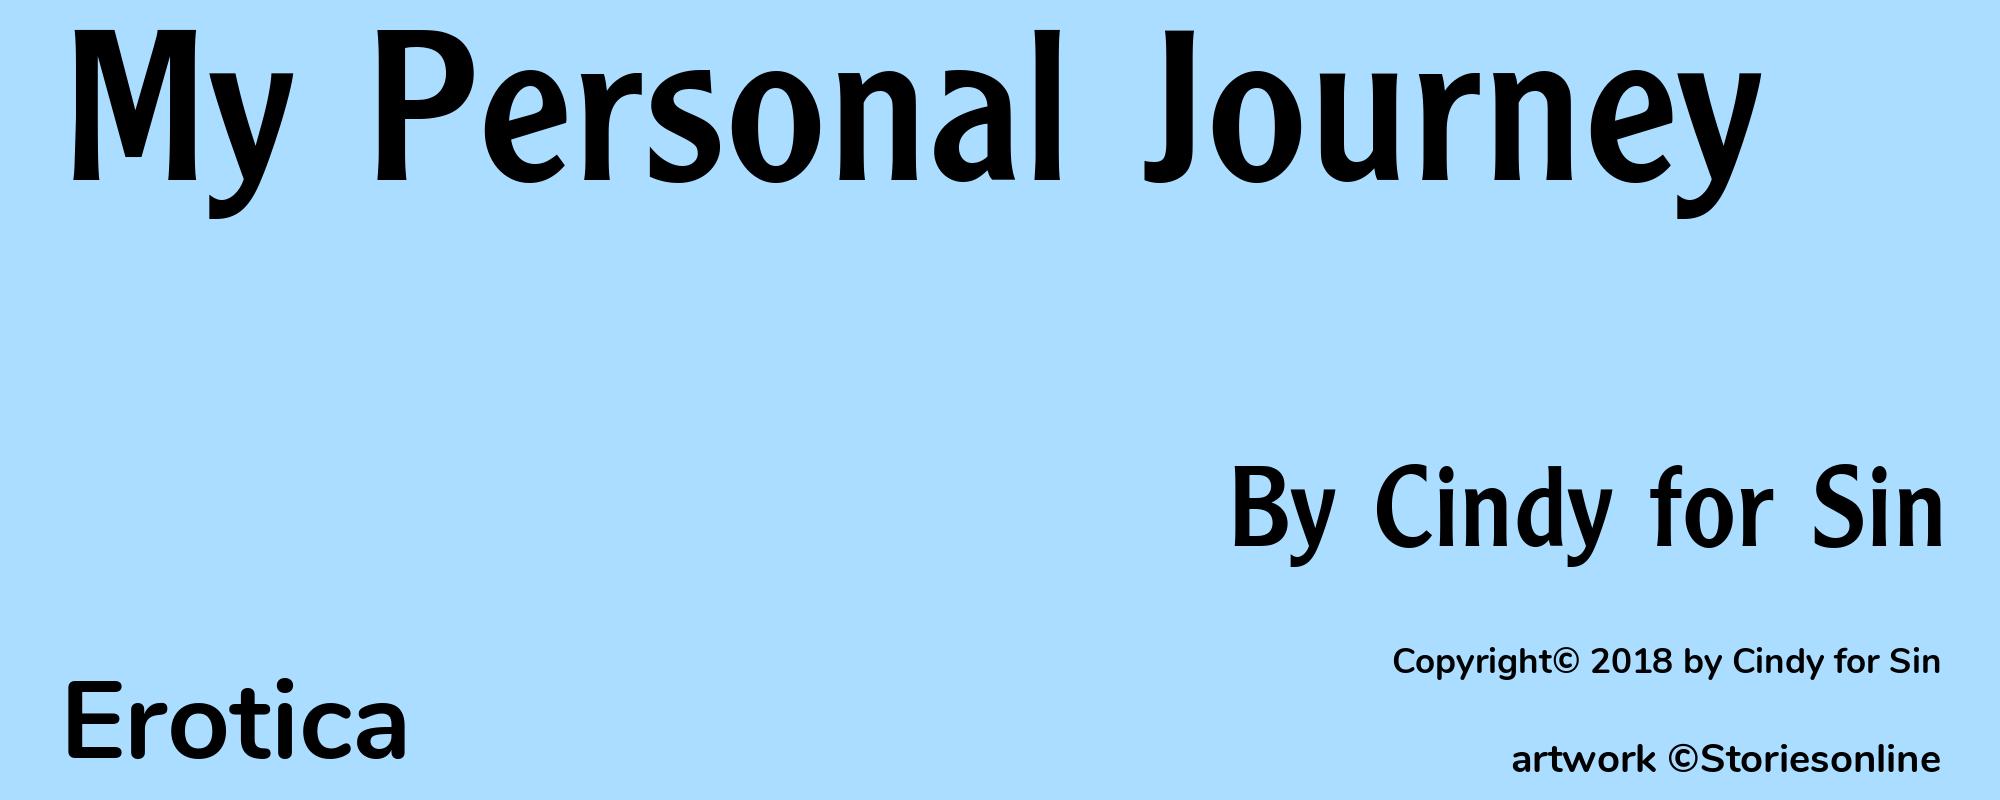 My Personal Journey - Cover